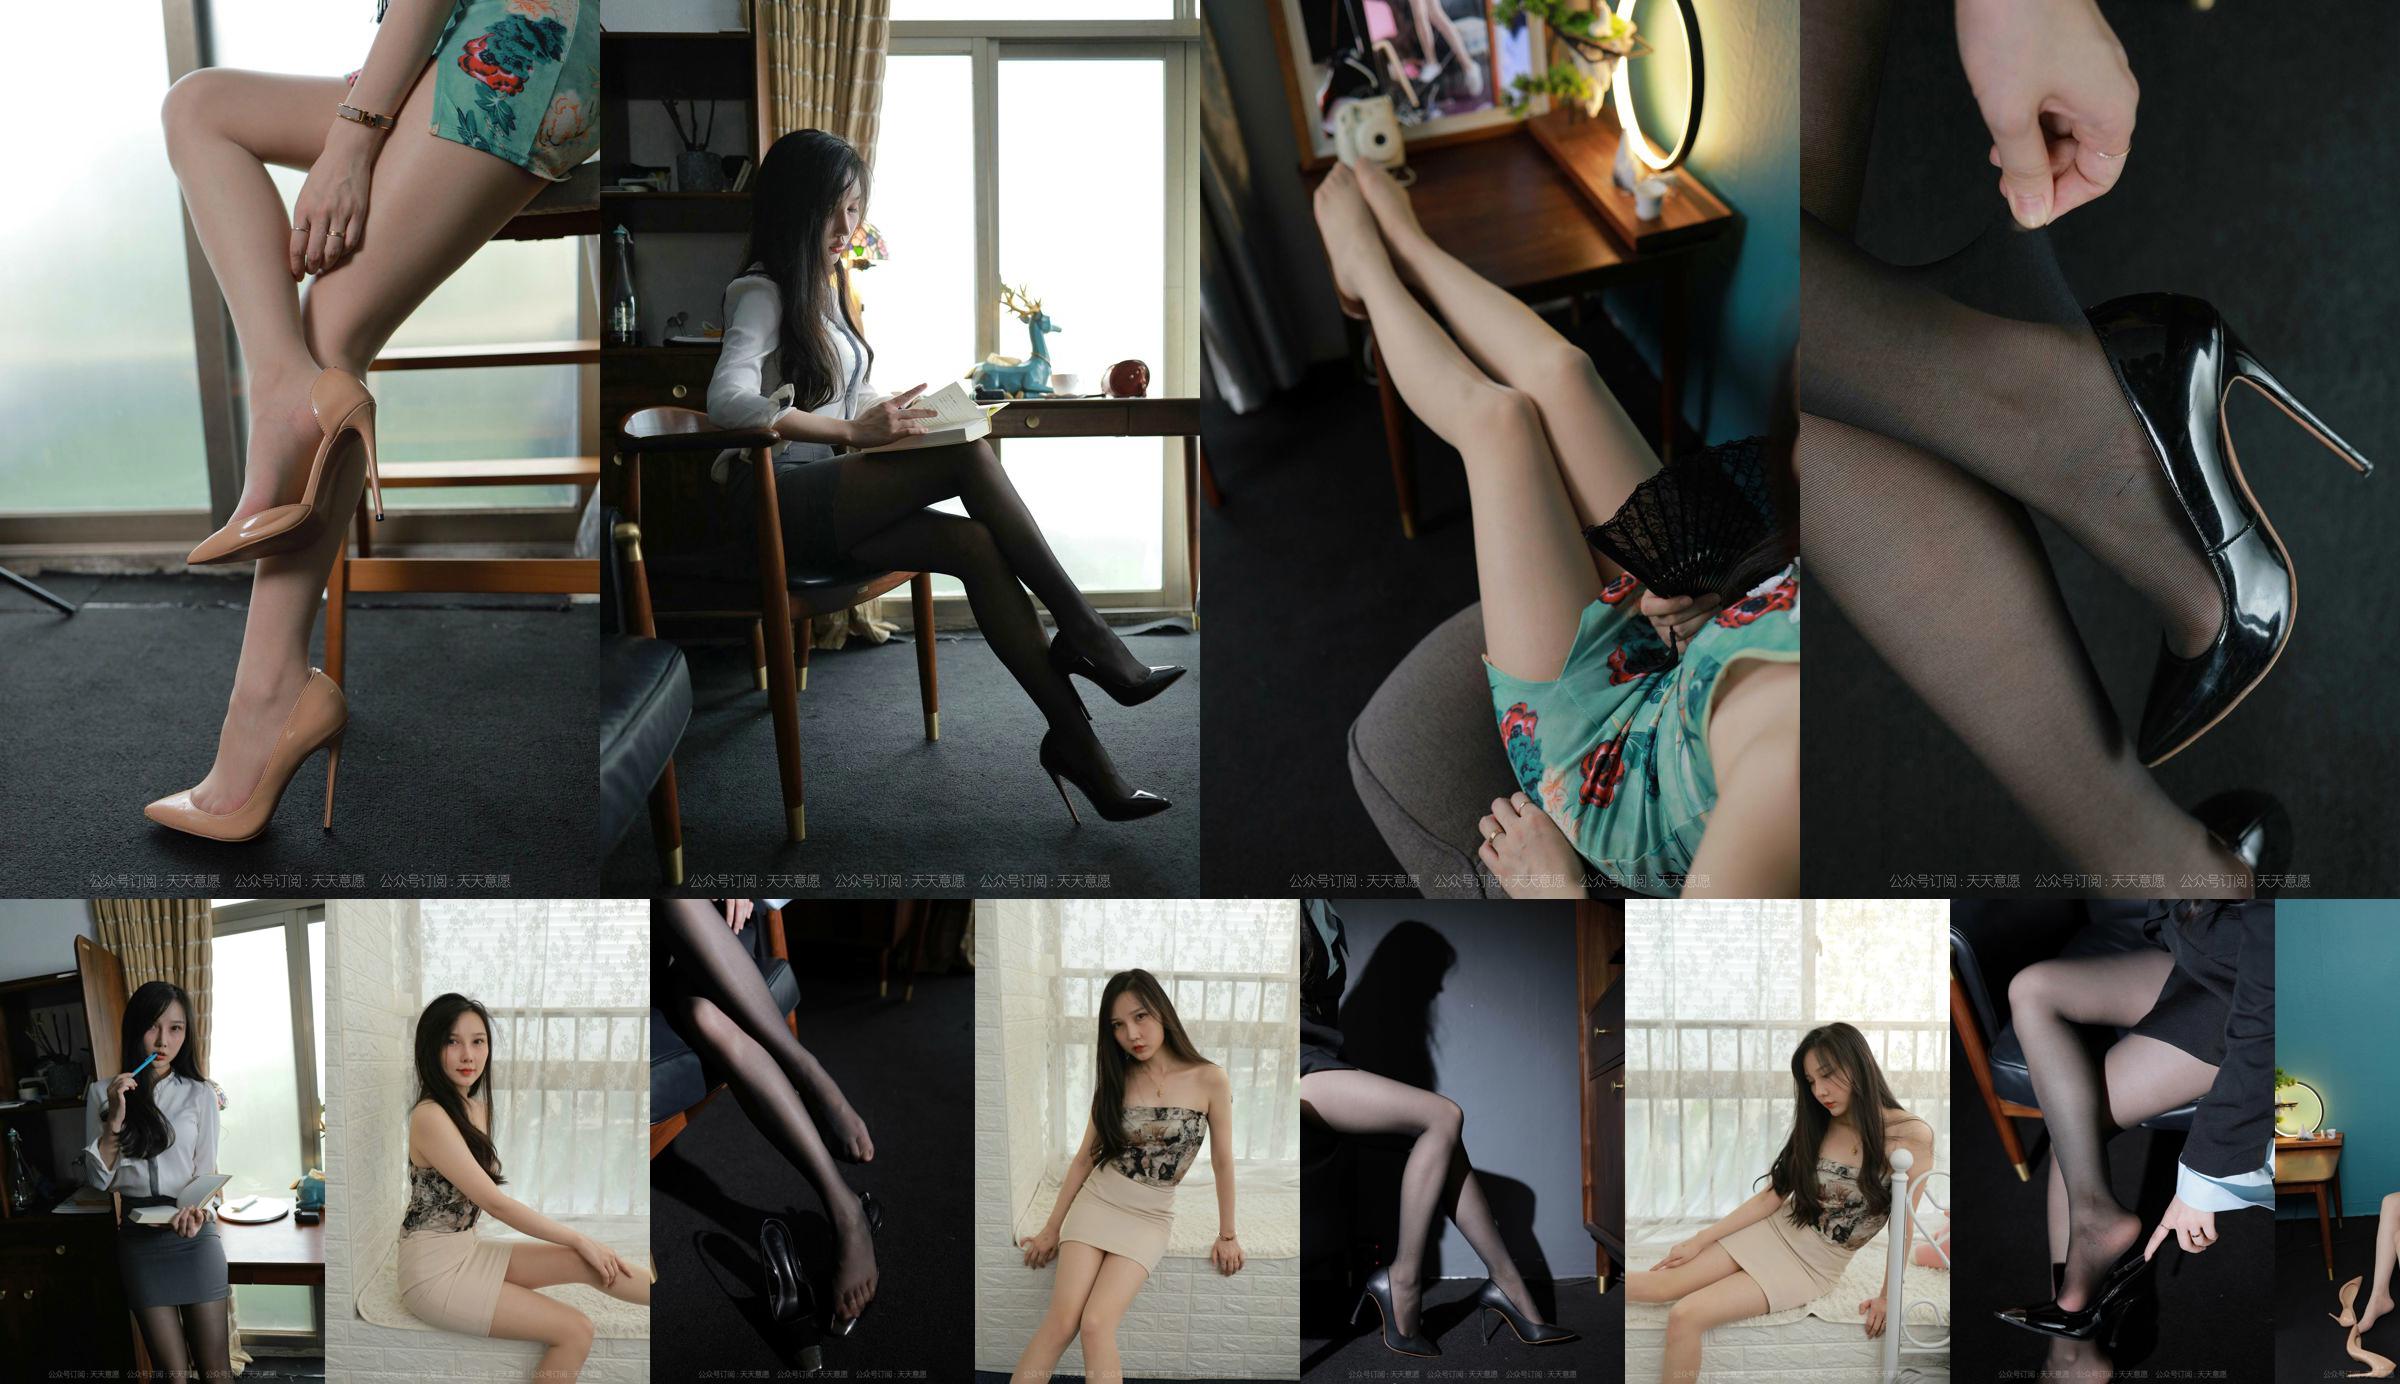 [IESS 奇思趣向] Model: Wen Xin "Sky Blue and Other Misty Rain" No.dc19f1 Pagina 1